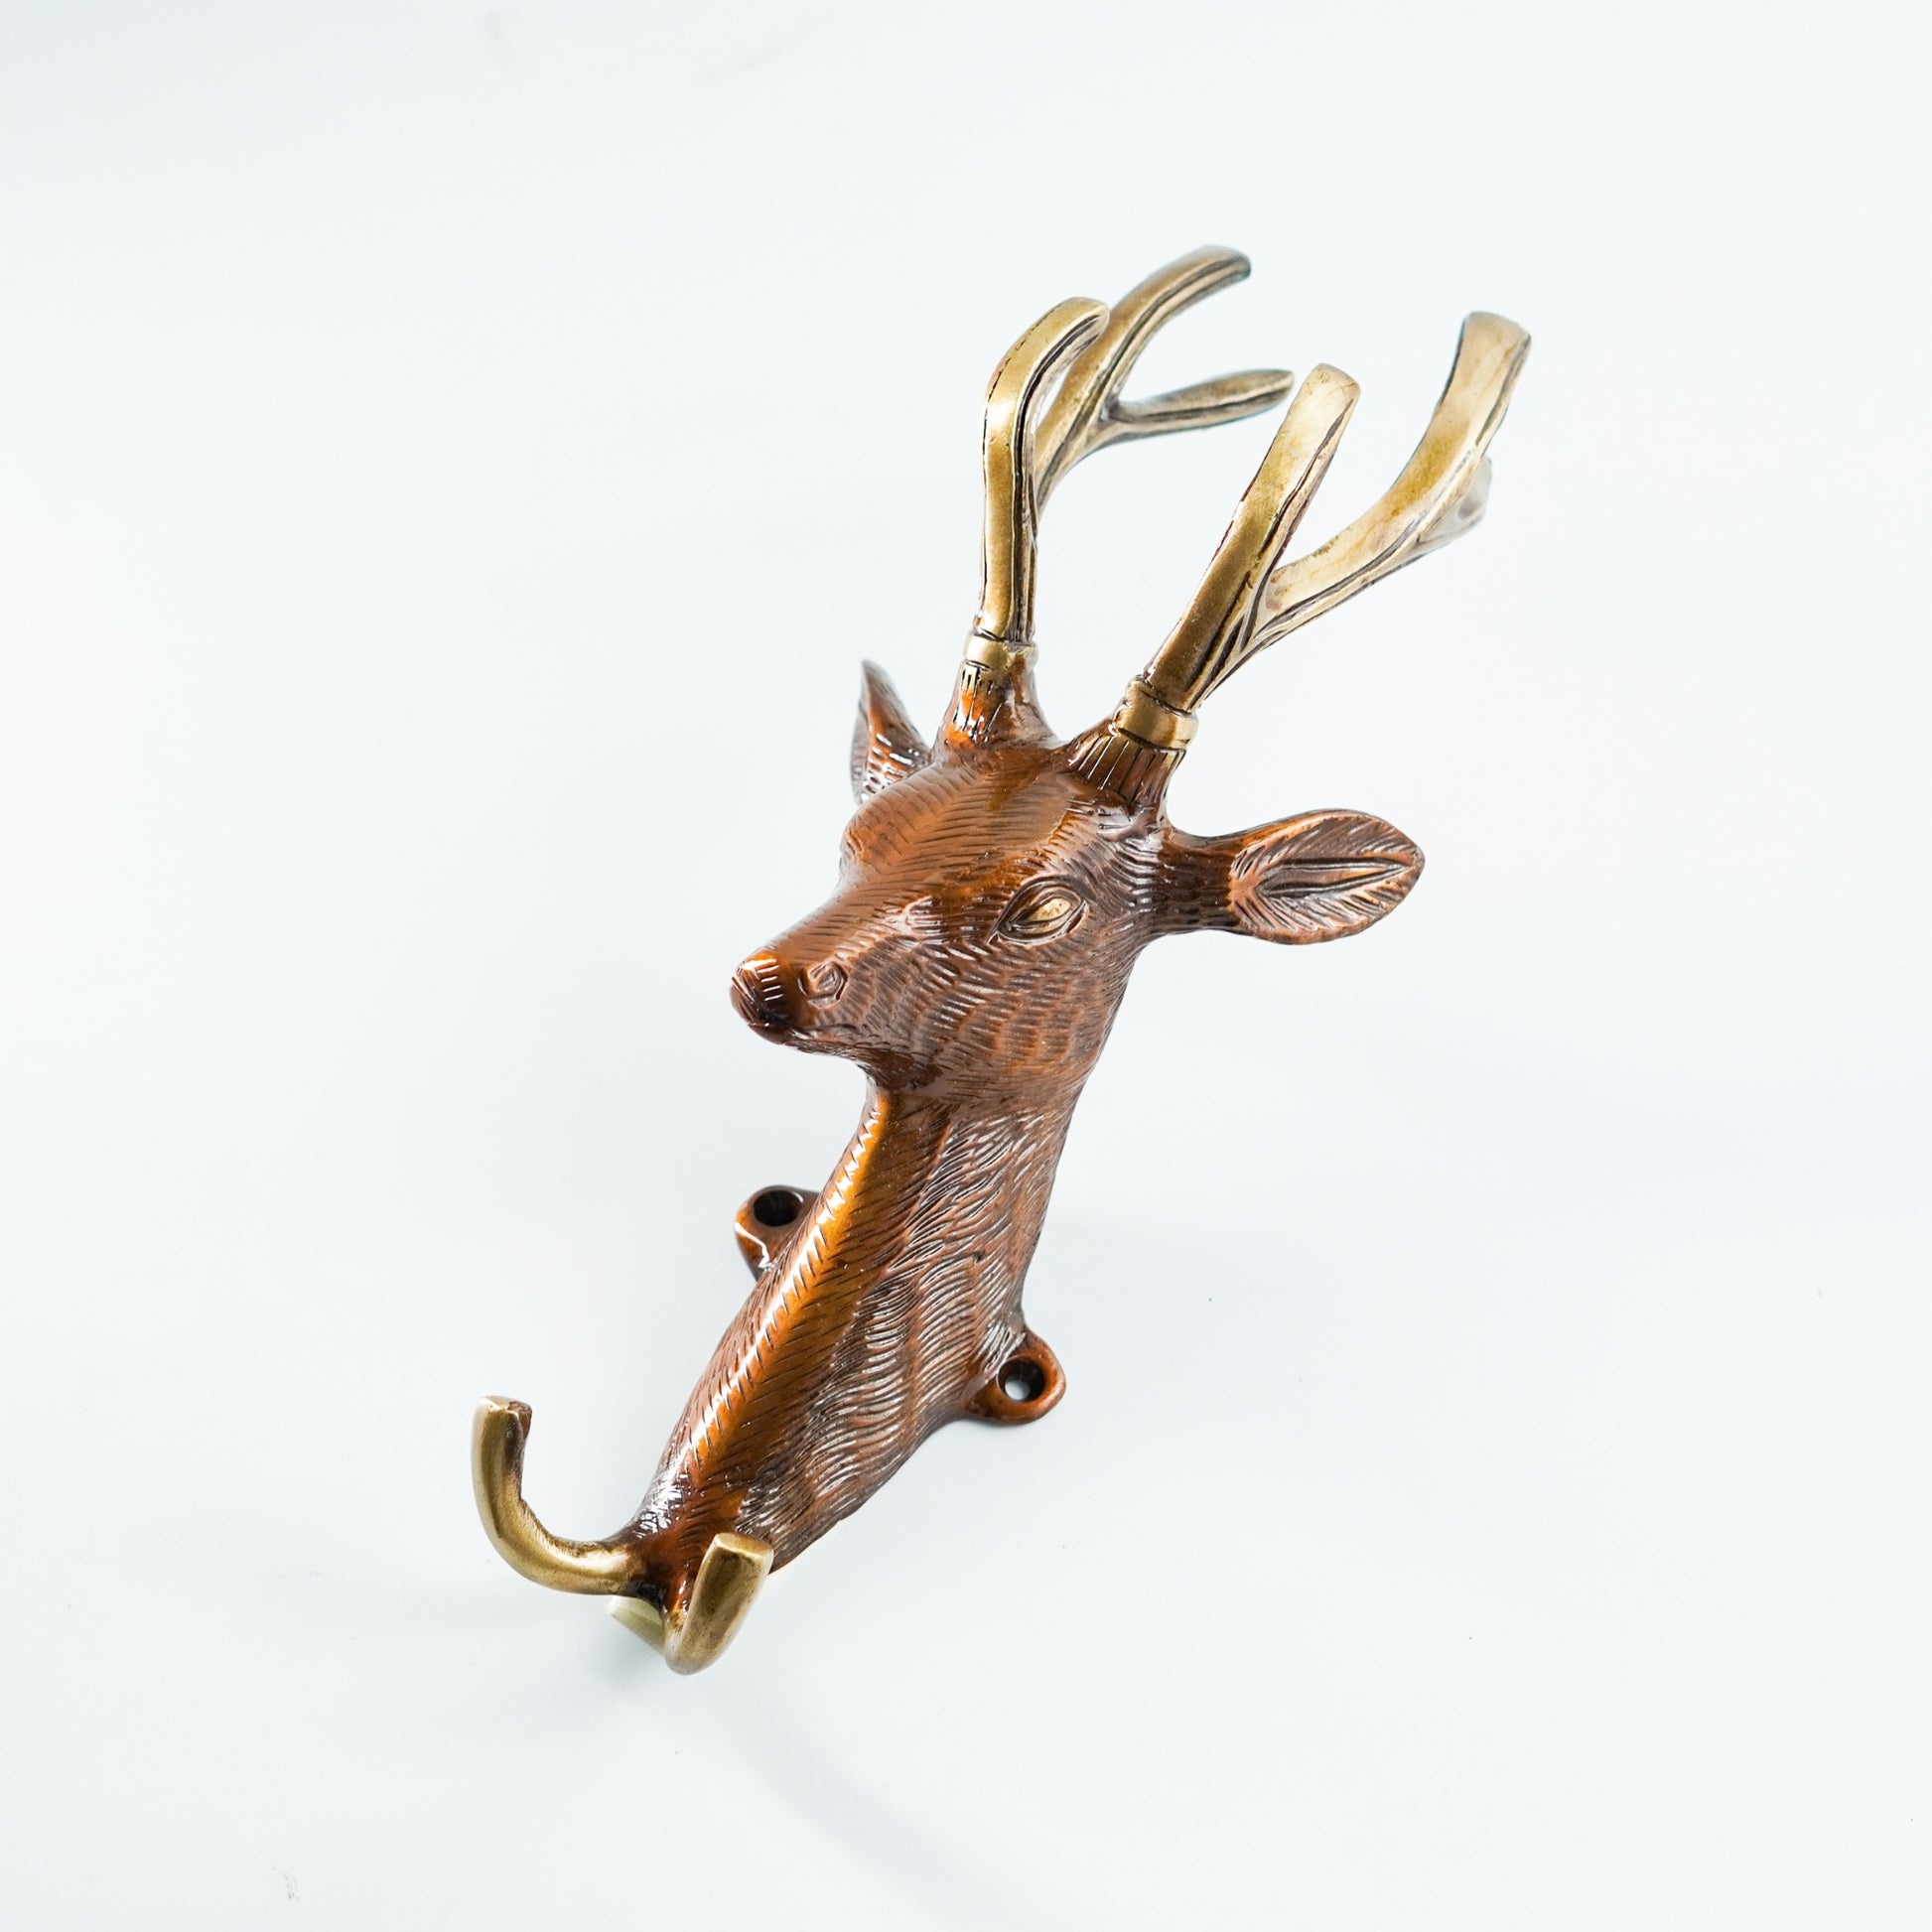 Home Decorative Hook Deer Head Decorated All-Copper Hook Wall